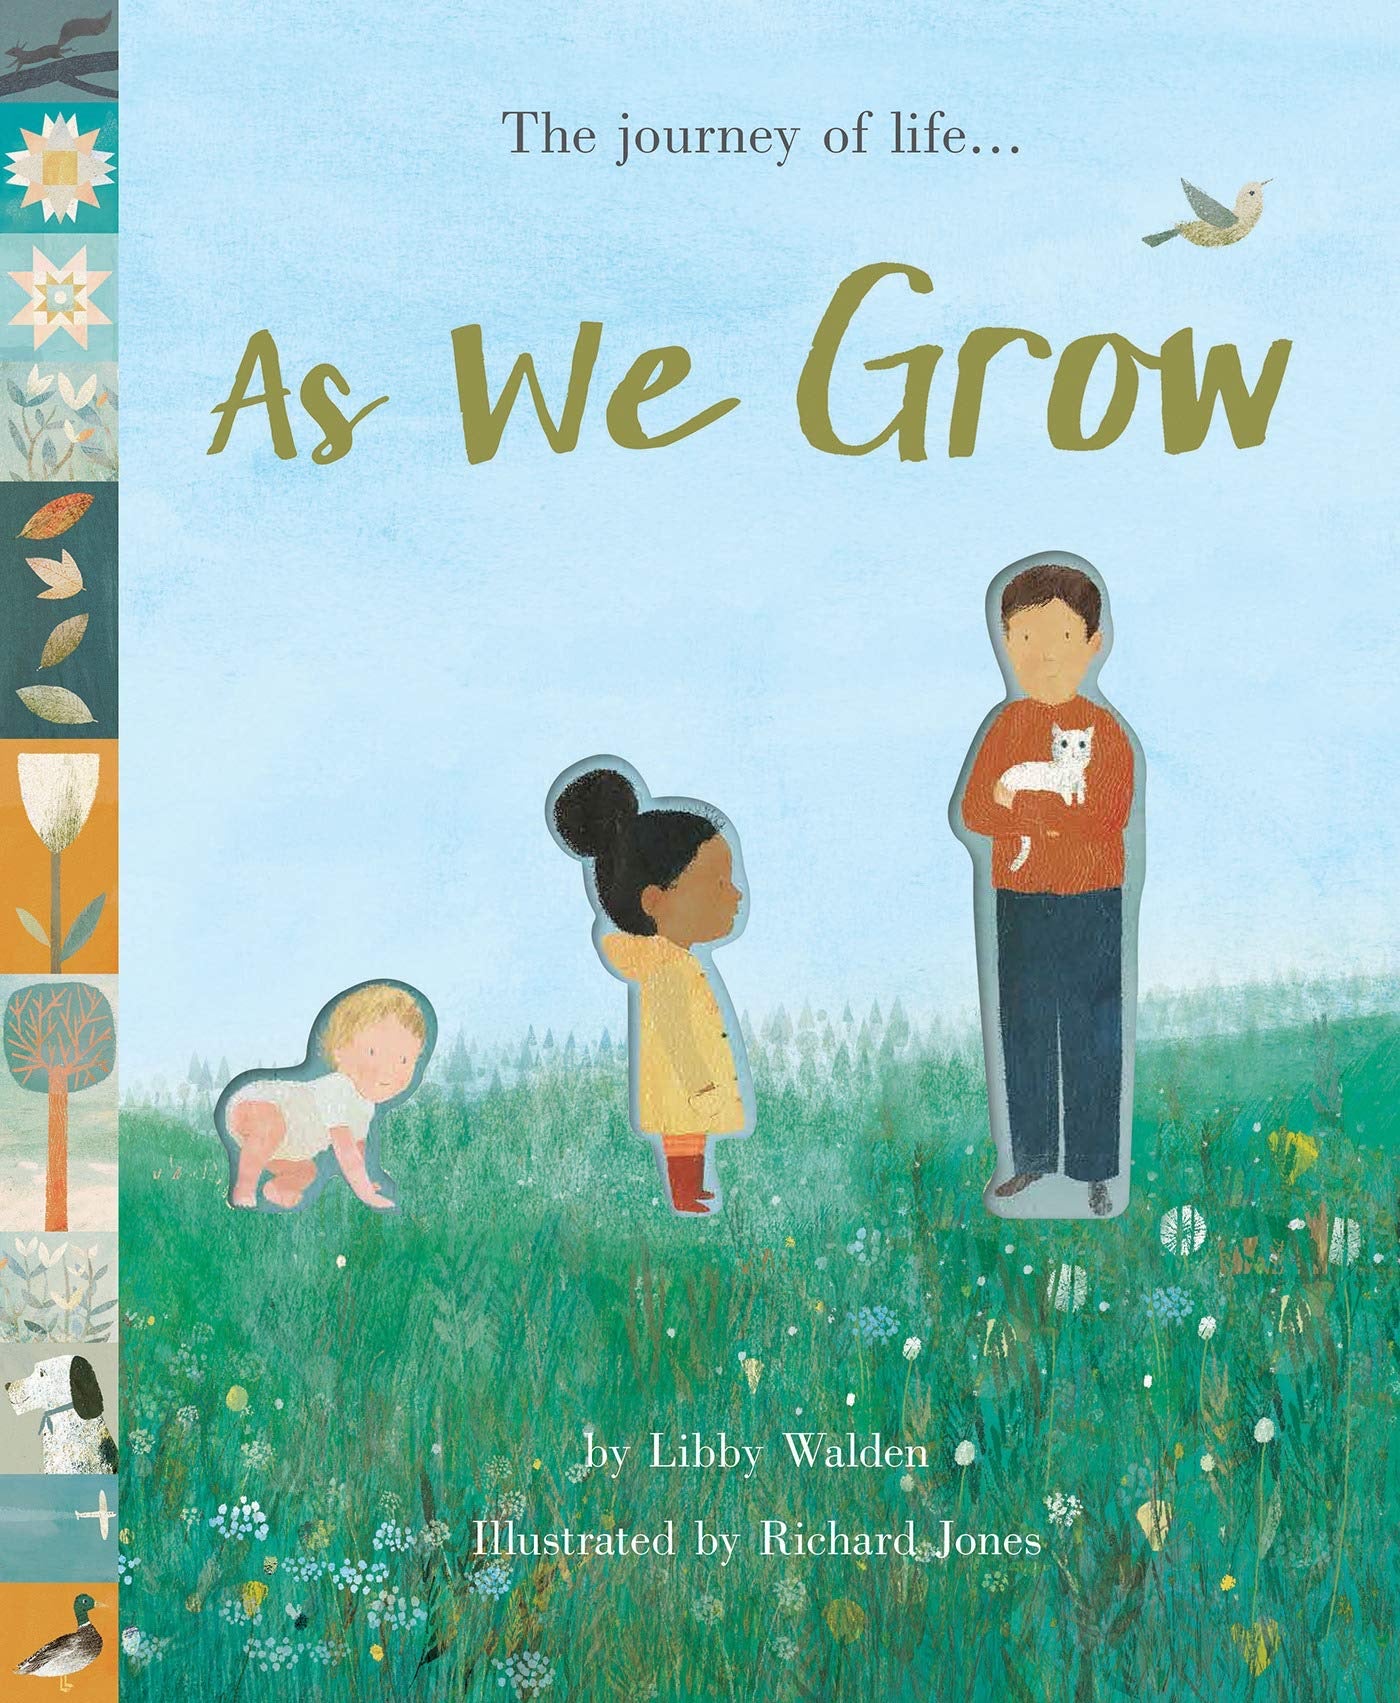 As We Grow by Libby Walden